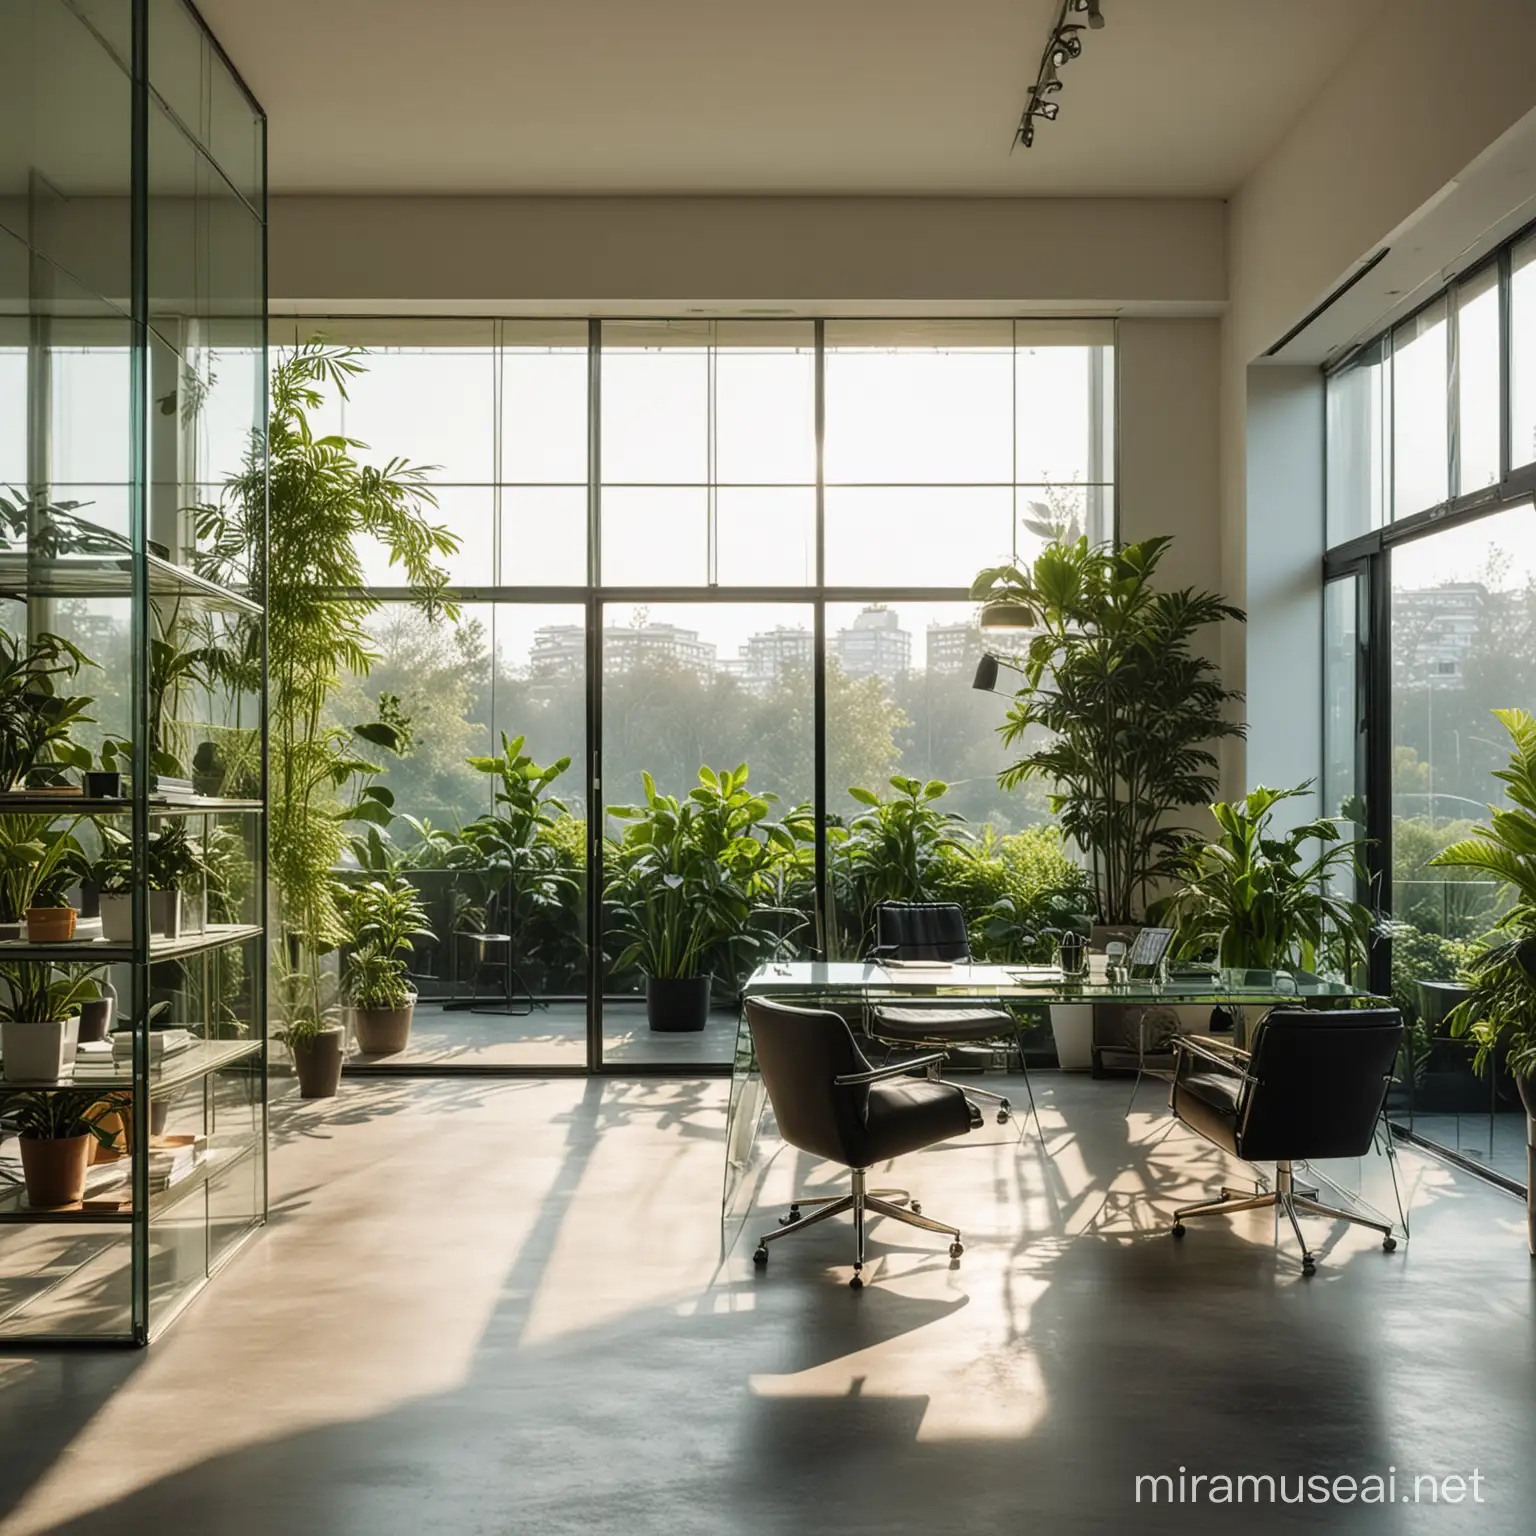 Minimalistic Glass Office with Designer Furniture and Green Plants in Dramatic Morning Light